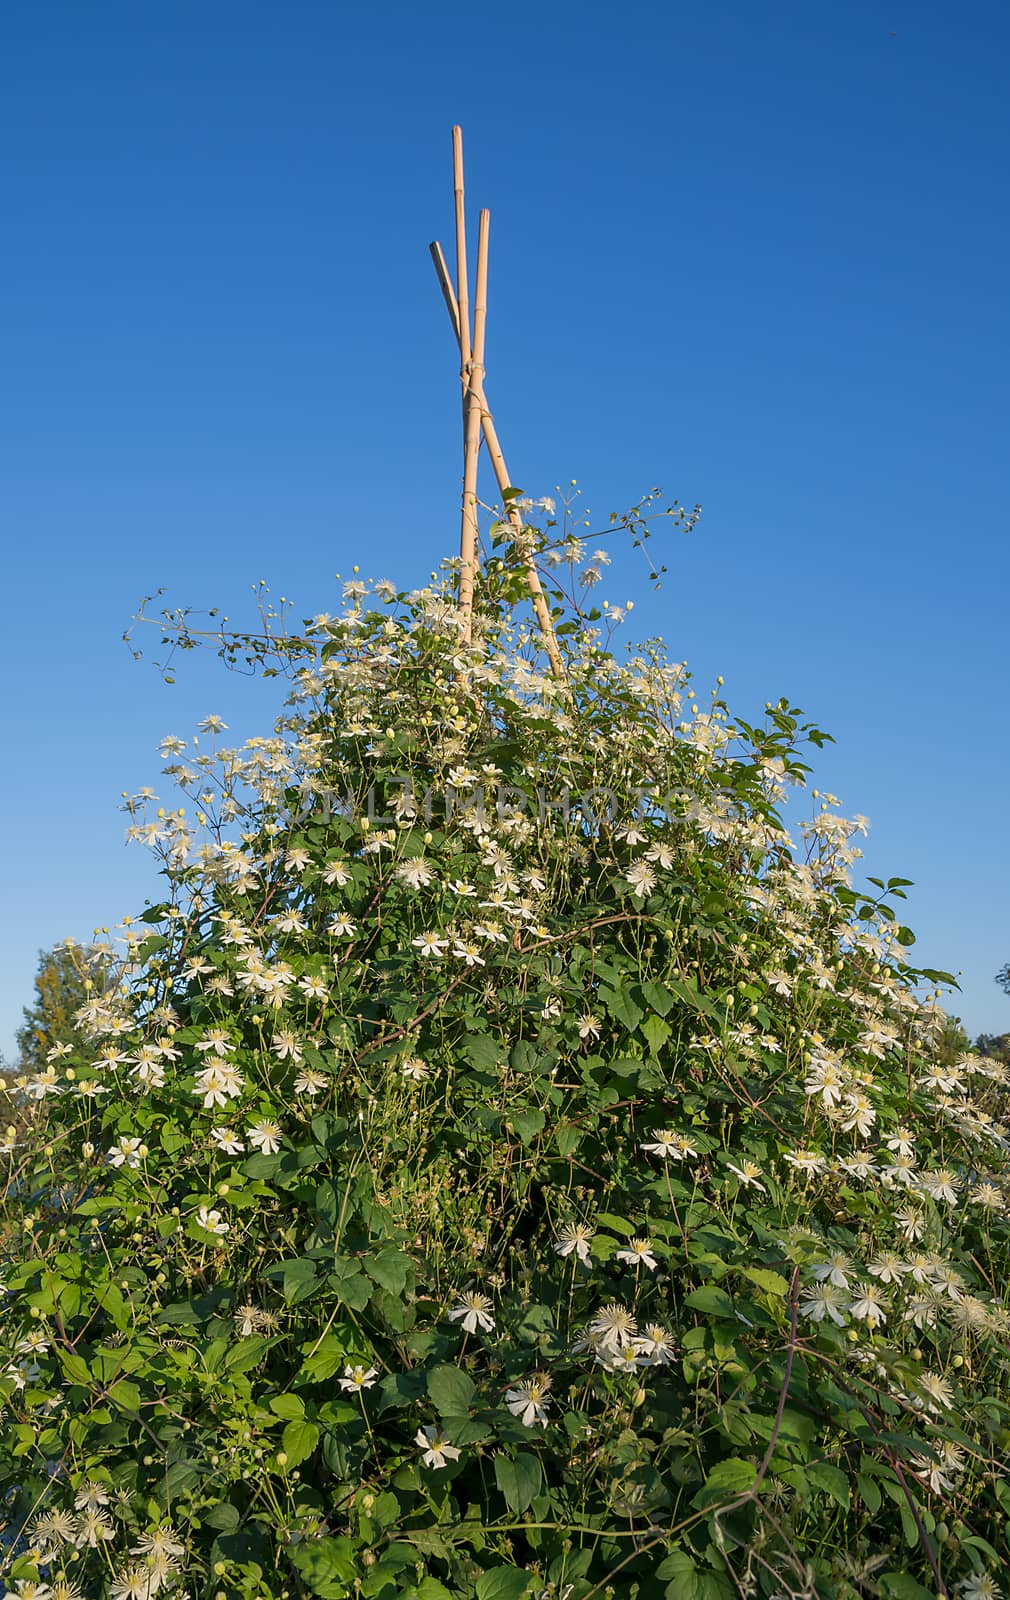 Clematis Alba climbing on support canes.